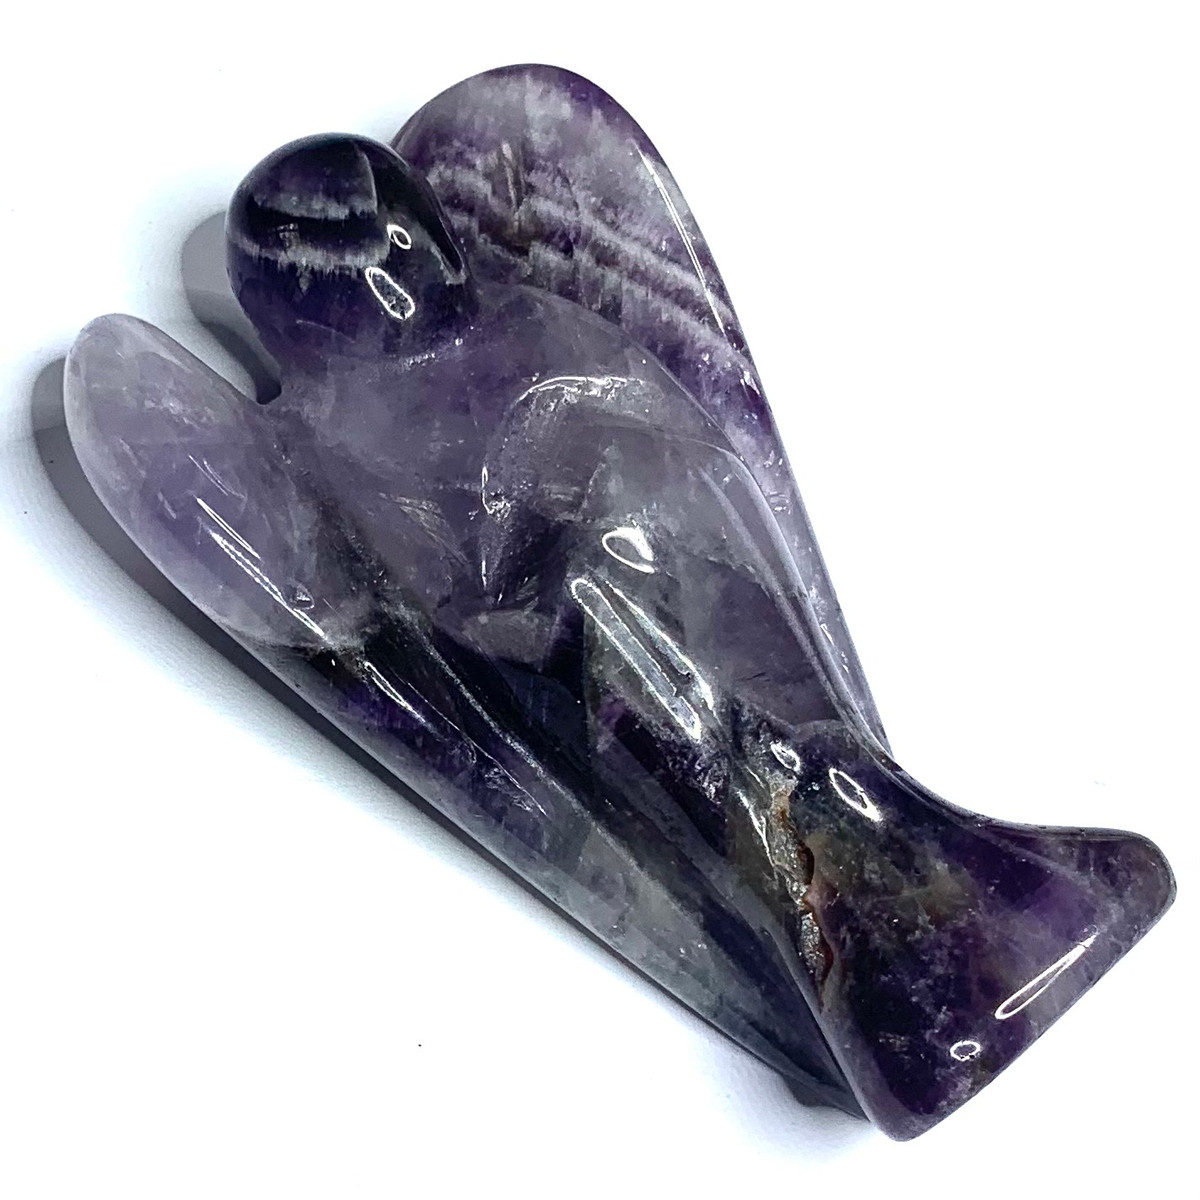 One of a Kind Hand Carved Chevron Amethyst Angel Stone-3 x 2" (NC4419)